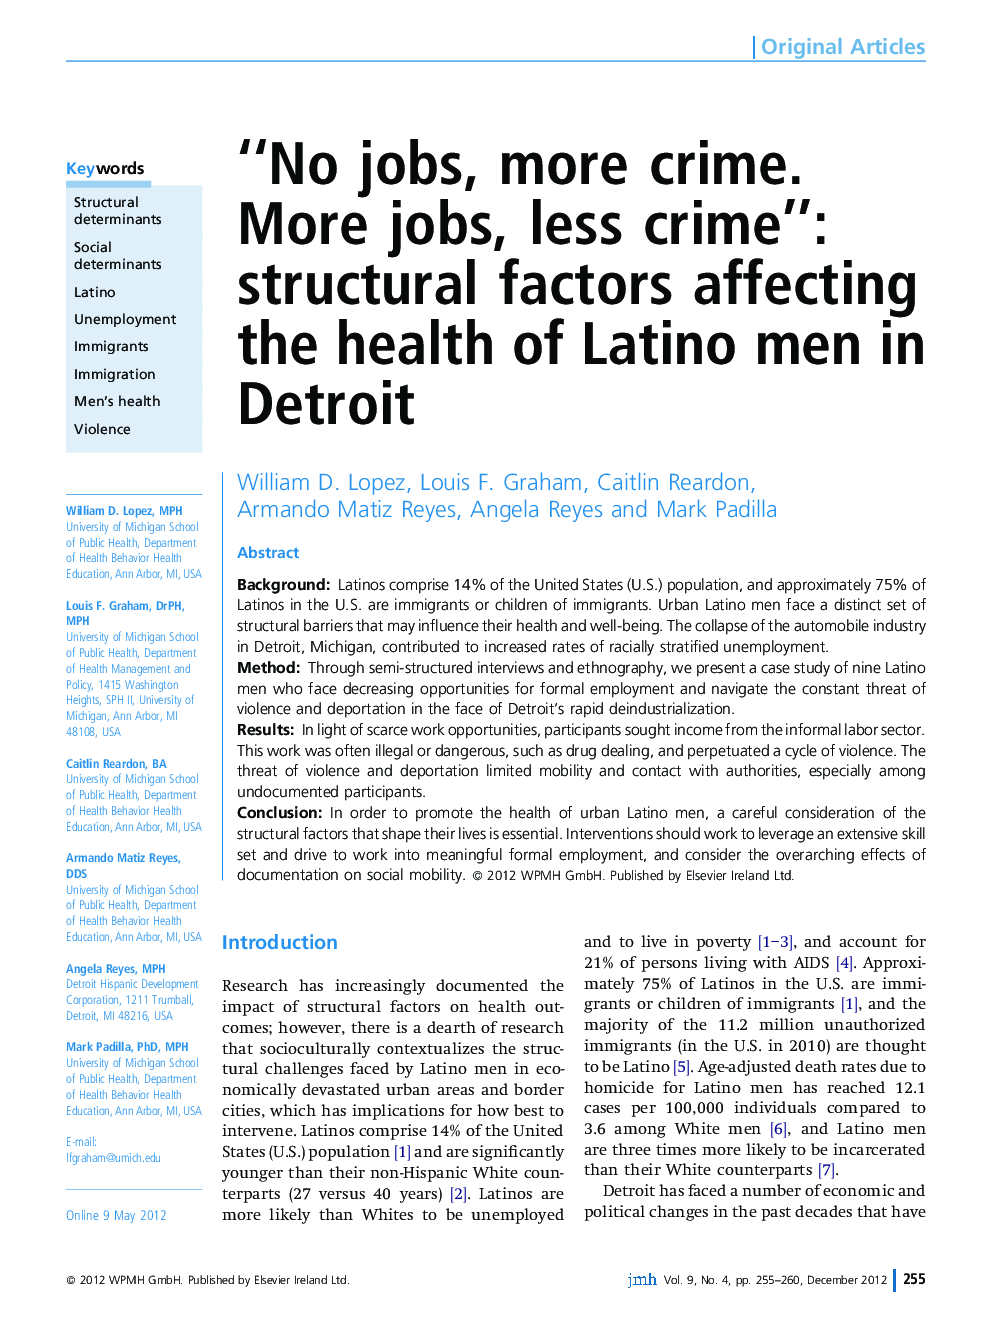 “No jobs, more crime. More jobs, less crime”: structural factors affecting the health of Latino men in Detroit